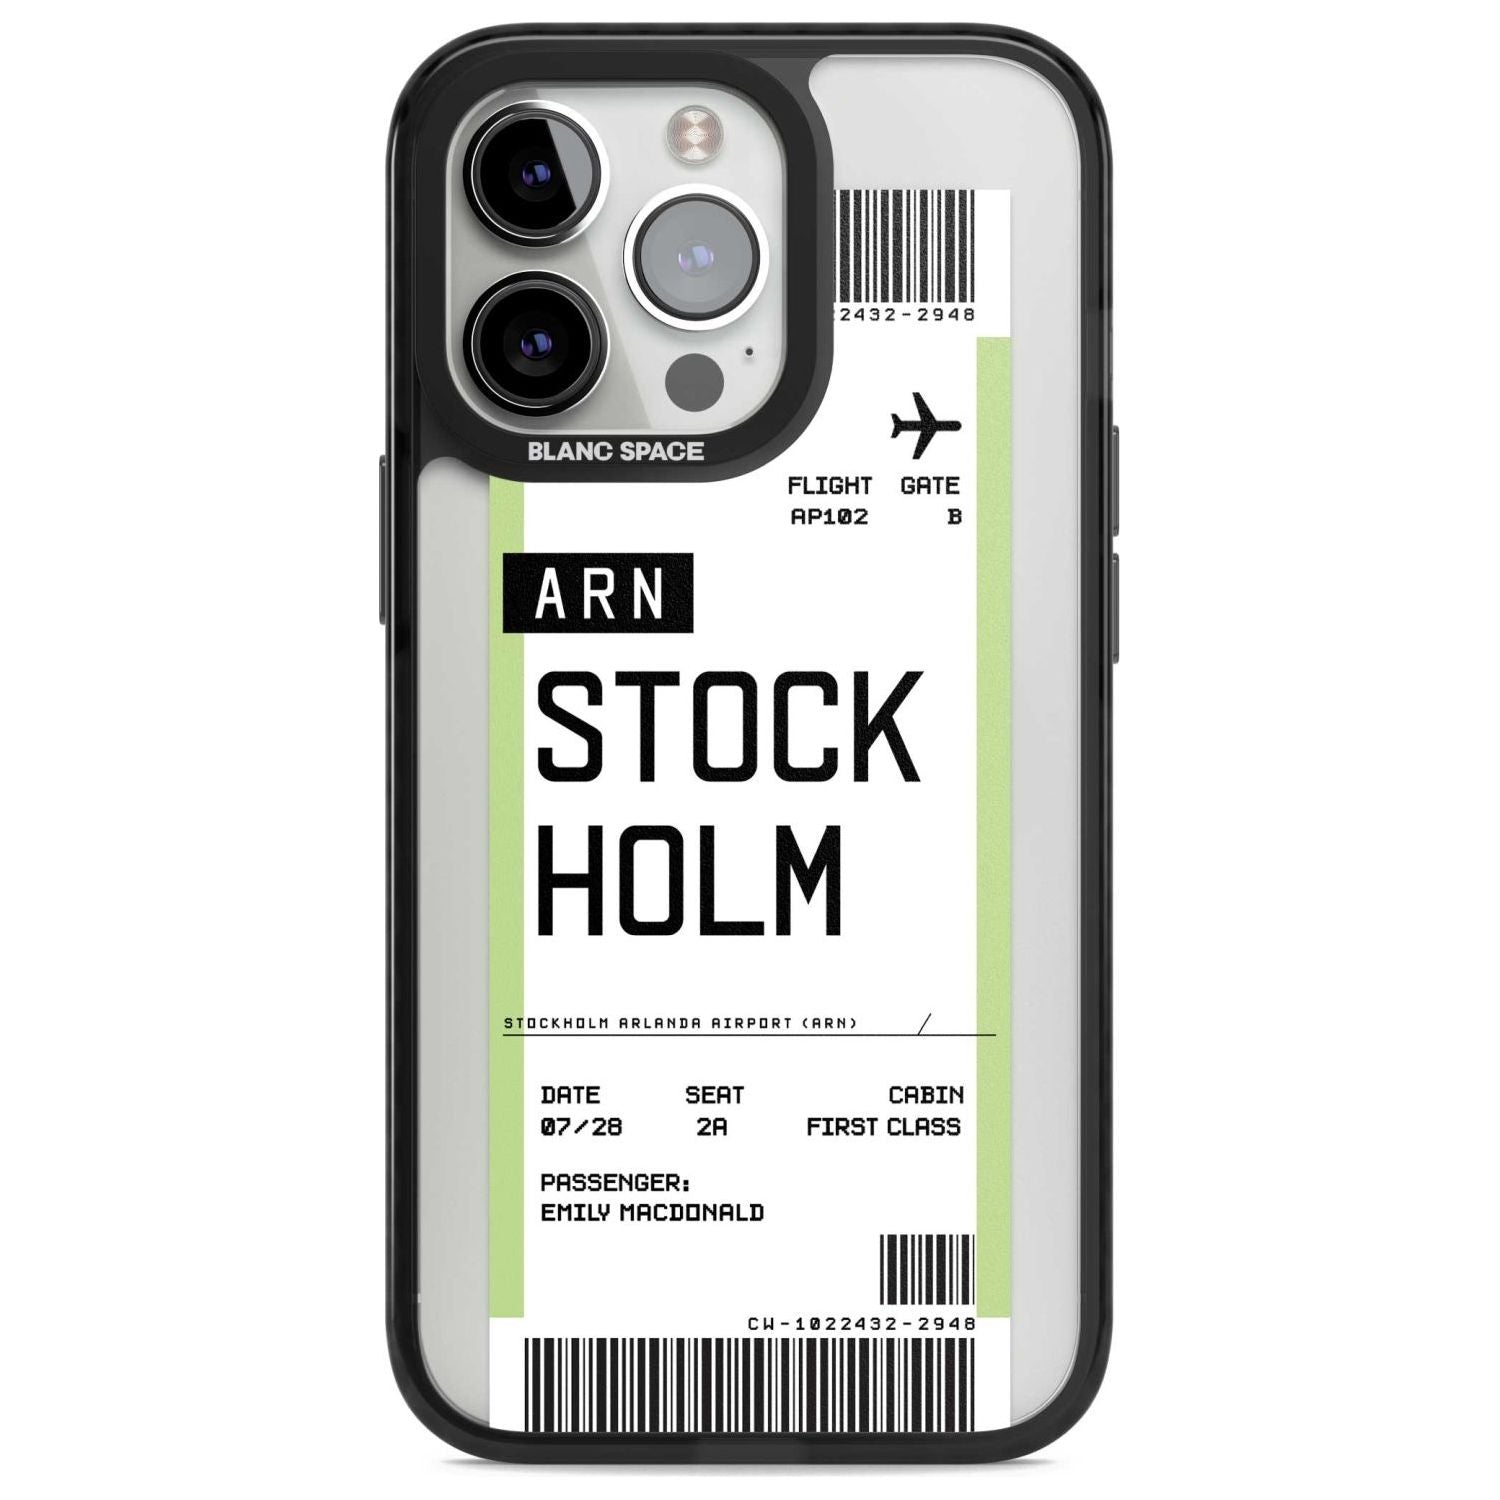 Personalised Stockholm Boarding Pass Custom Phone Case iPhone 15 Pro Max / Magsafe Black Impact Case,iPhone 15 Pro / Magsafe Black Impact Case,iPhone 14 Pro Max / Magsafe Black Impact Case,iPhone 14 Pro / Magsafe Black Impact Case,iPhone 13 Pro / Magsafe Black Impact Case Blanc Space